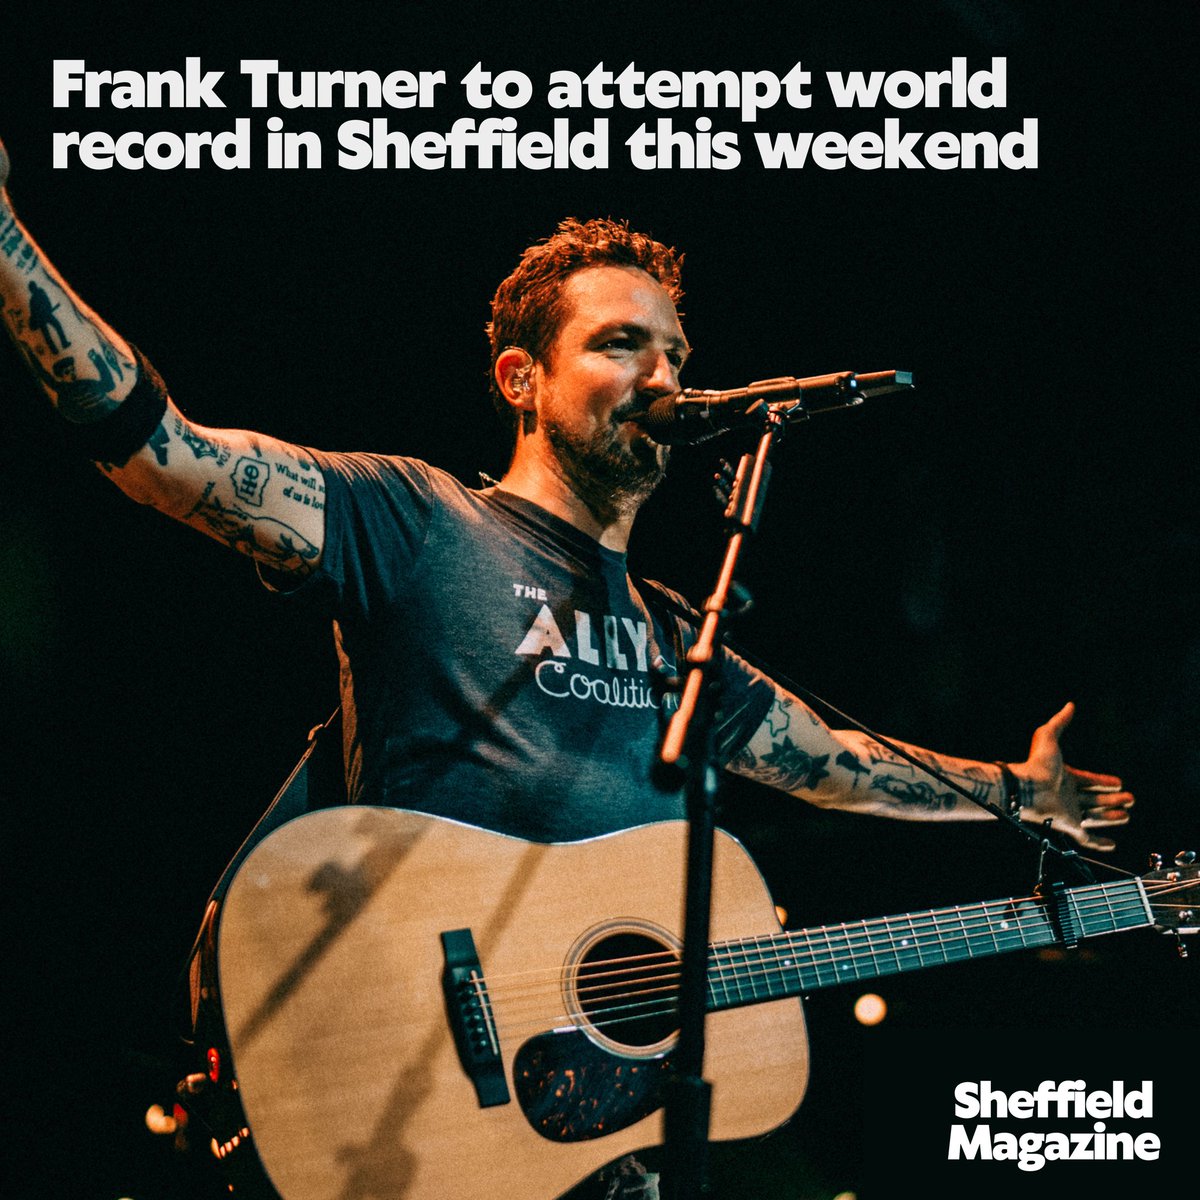 This Sat 4 May, @frankturner will be attempting a world record for the most gigs in different cities in 24 hours - an attempt that will see him play The Foundry, in partnership with @beartreerecords! You can read all about it at sheffieldmagazine.co.uk Words by @steelcitysnaps